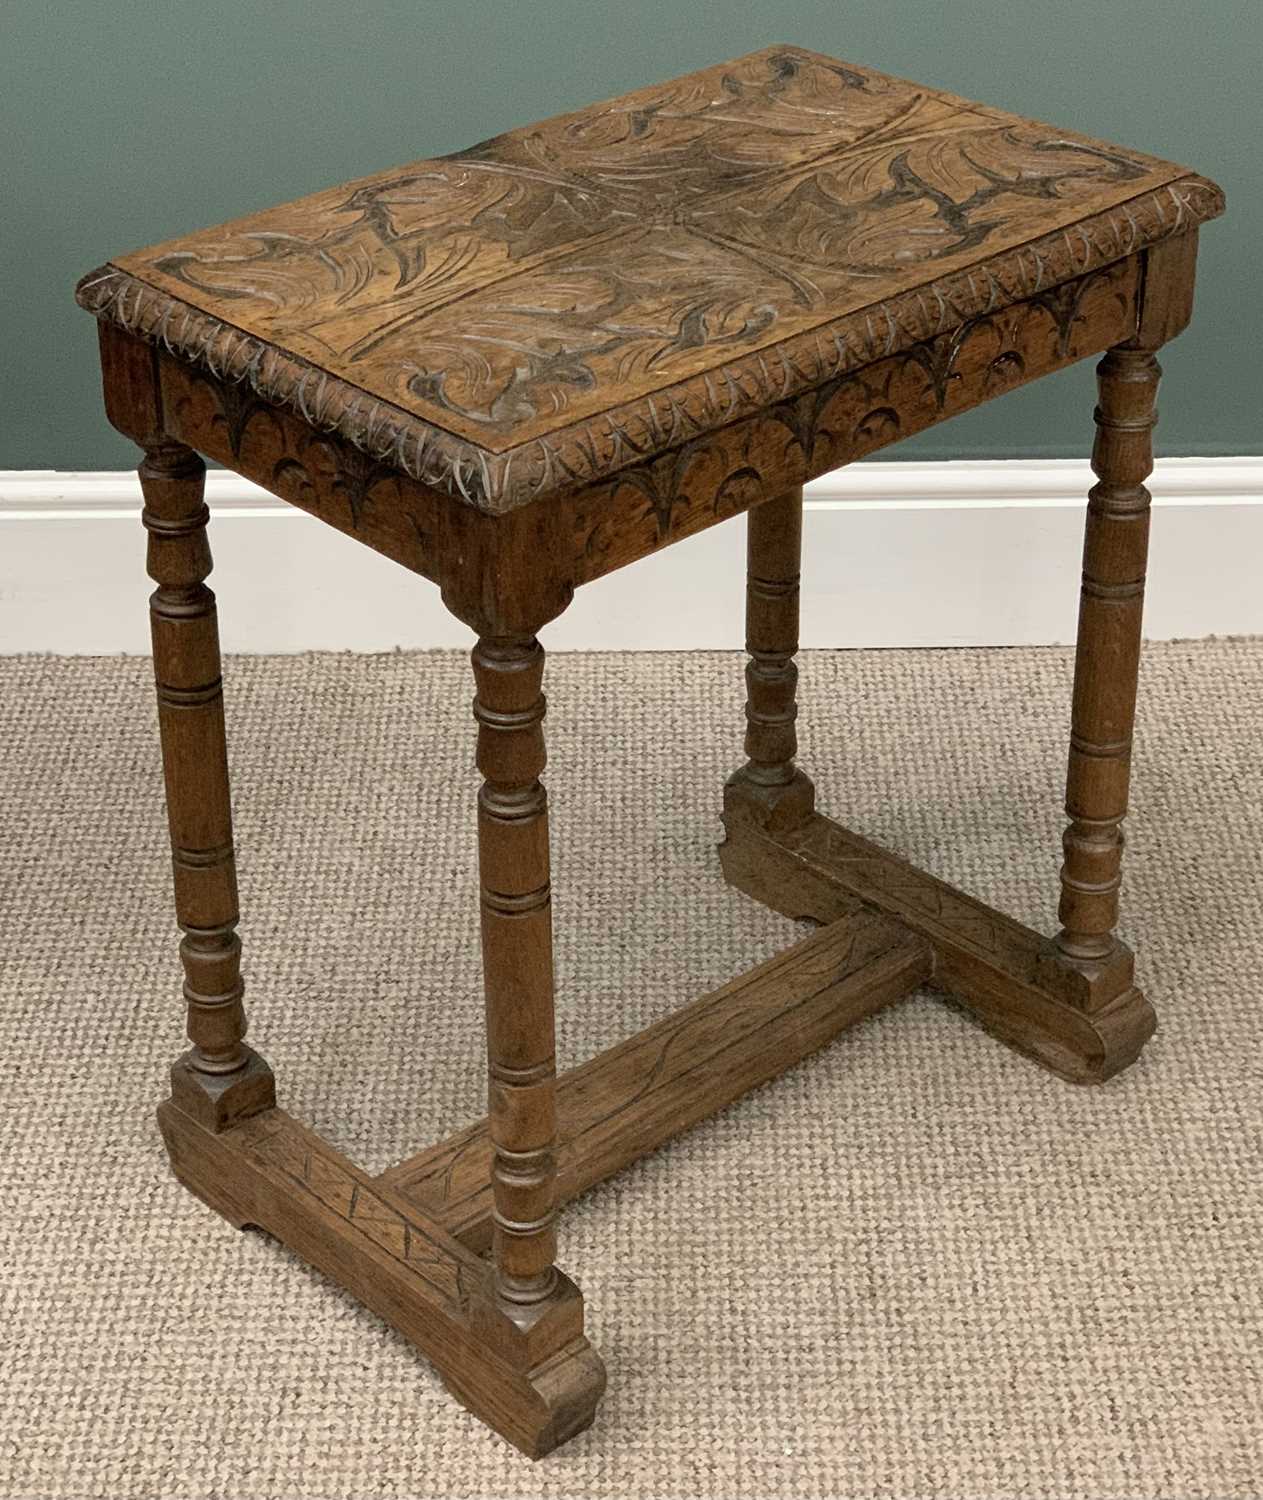 CARVED OAK SIDE TABLE with base stretcher, 65 (h) x 57 (w) x 37 (d) cms, a THREE LEGGED ELM - Image 4 of 7